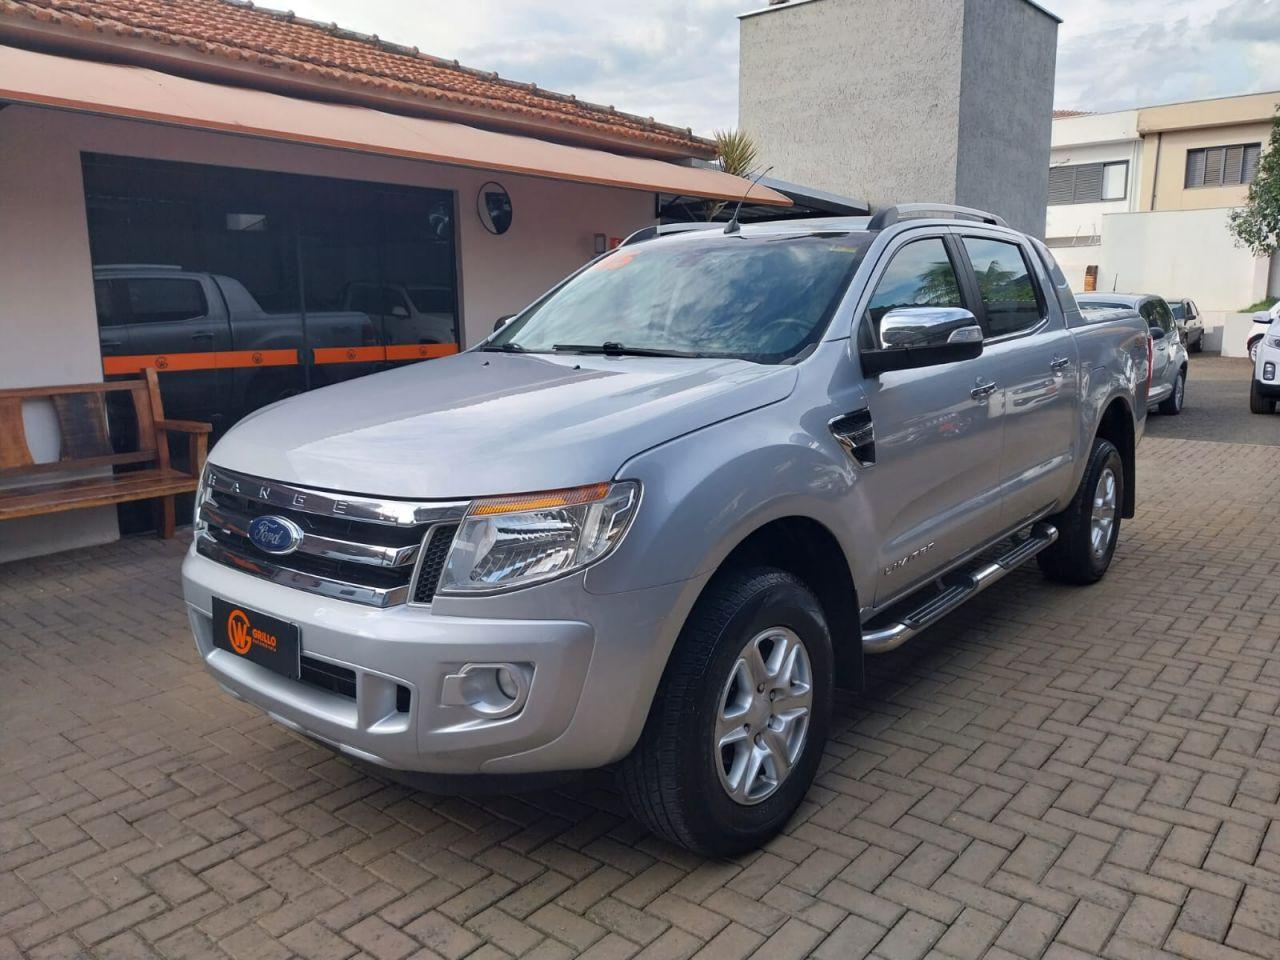 Ford ranger 3.2 20v Cabine Dupla 4x4 Limited Turbo Diesel Automático 2015